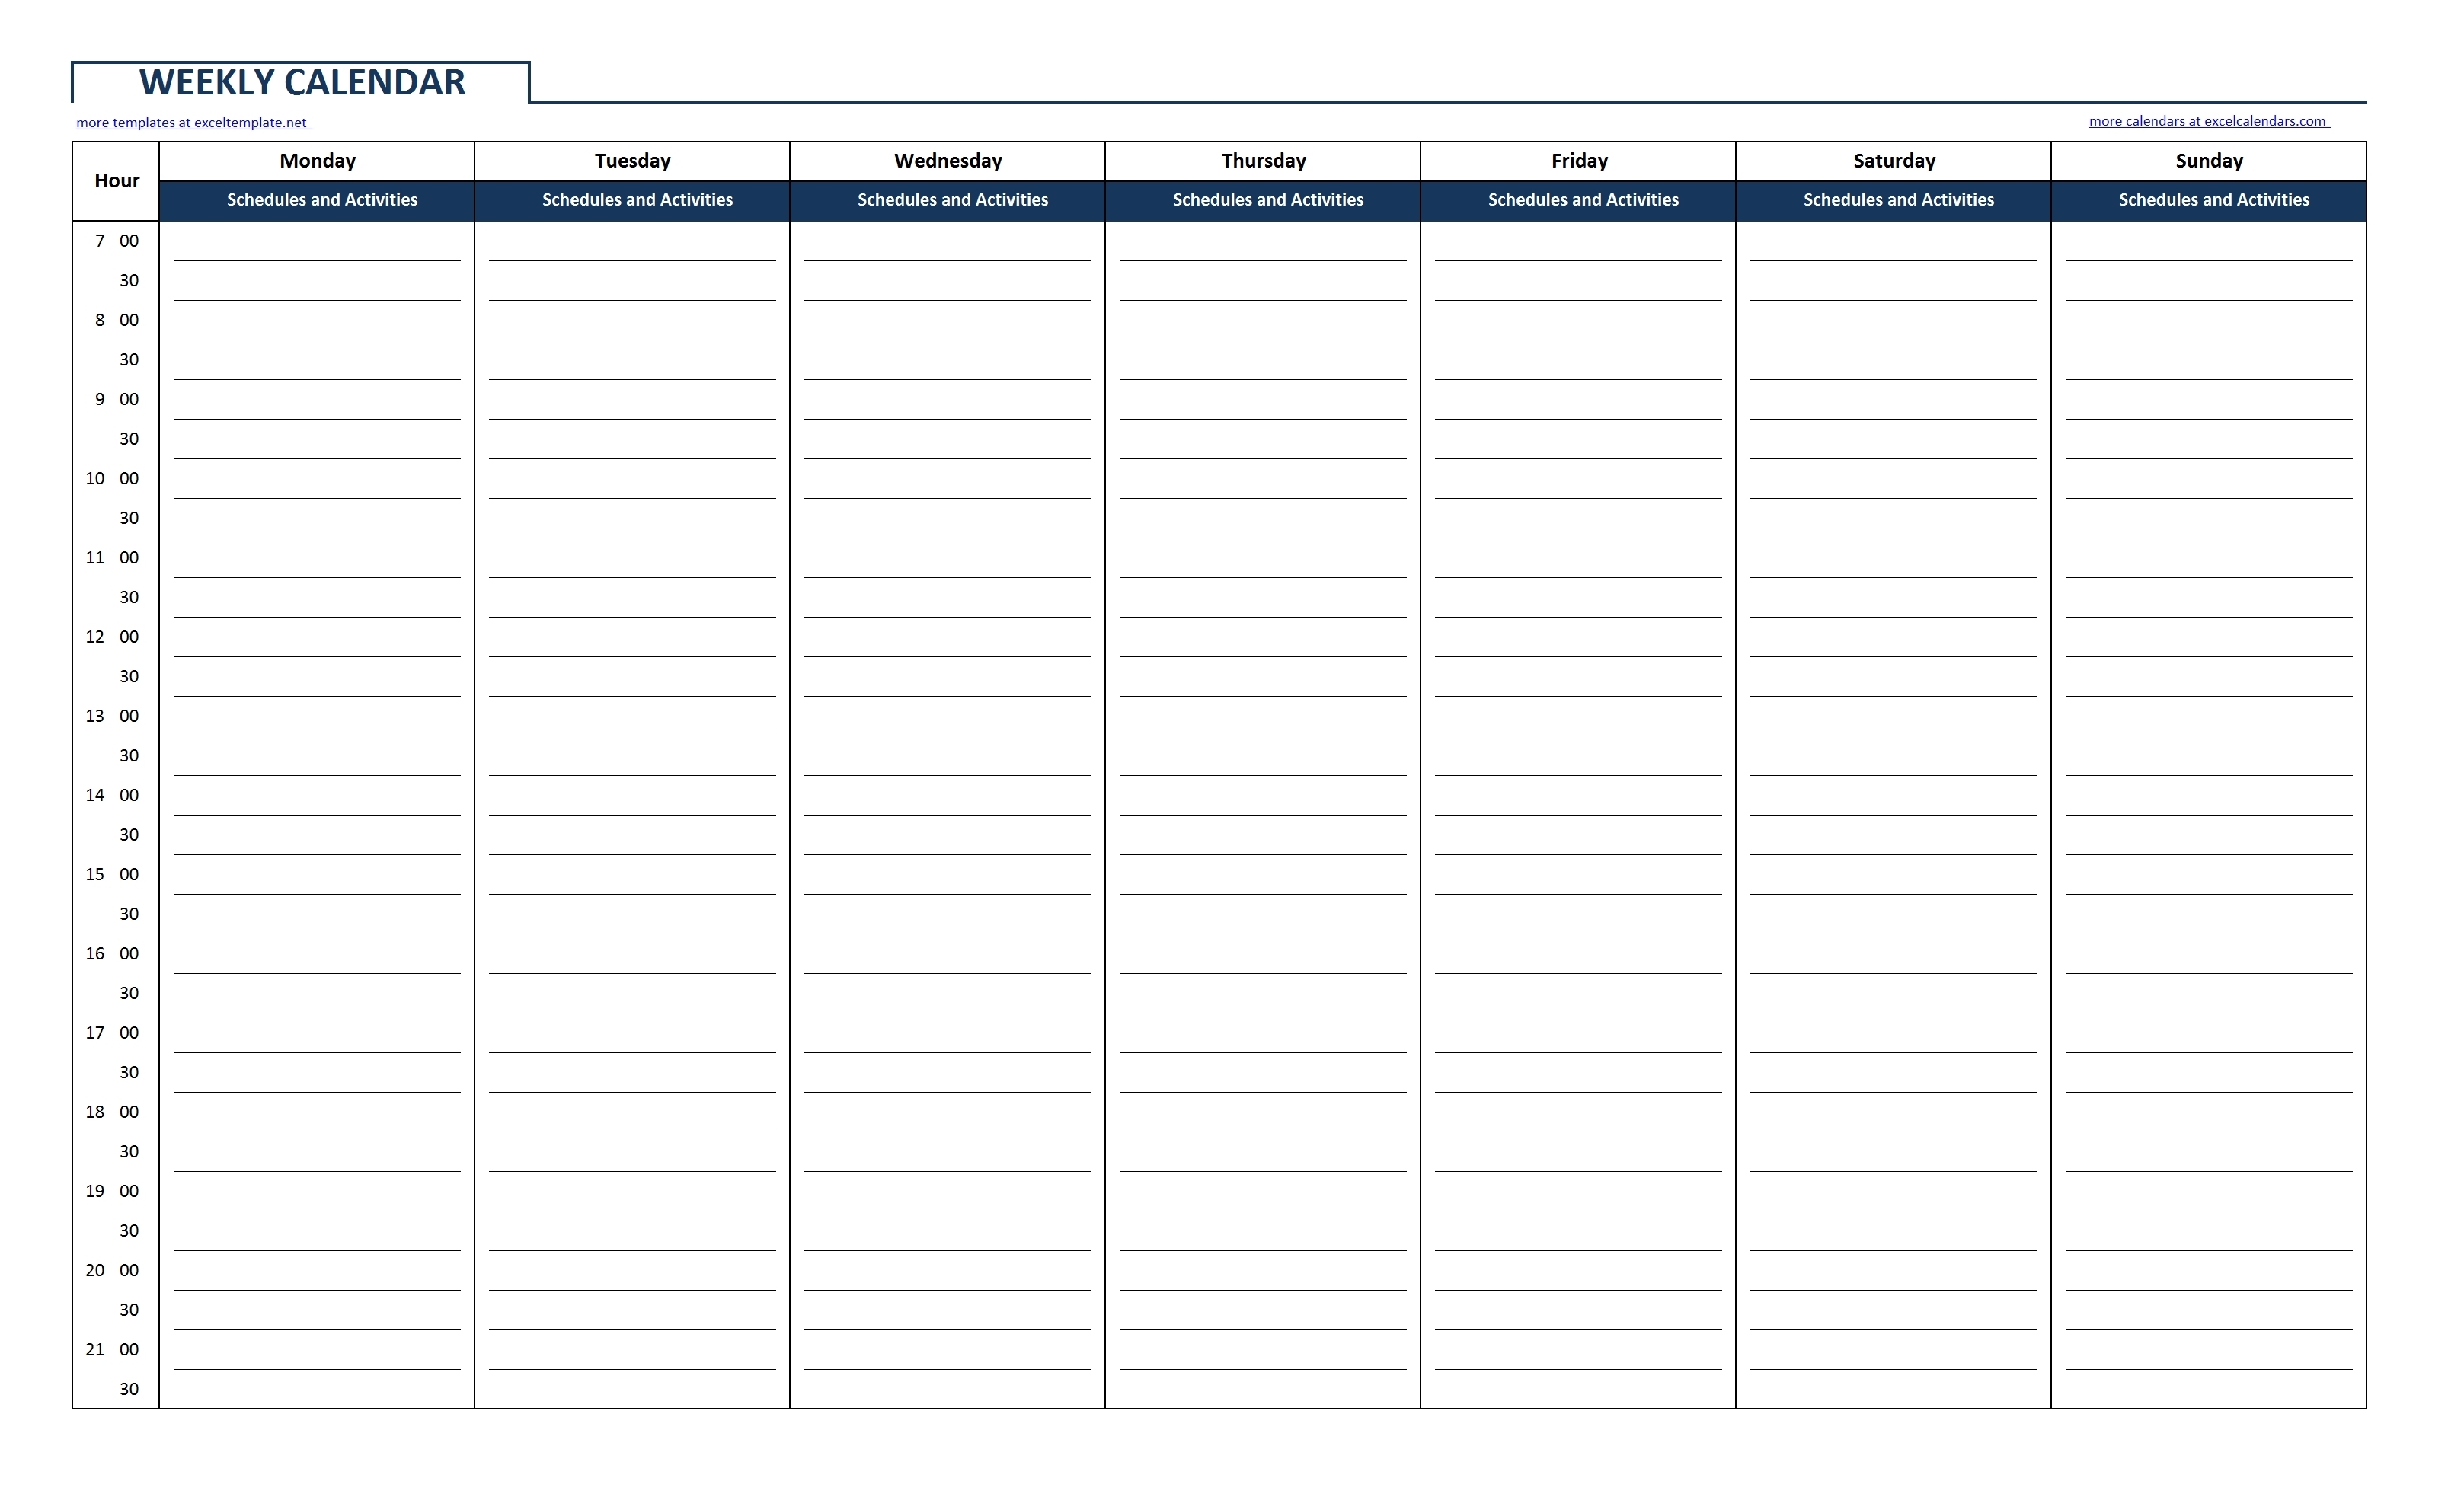 Blank Weekly Chedule With Times Download Them Or Print Calendar throughout Blank Calendar With Time Slots